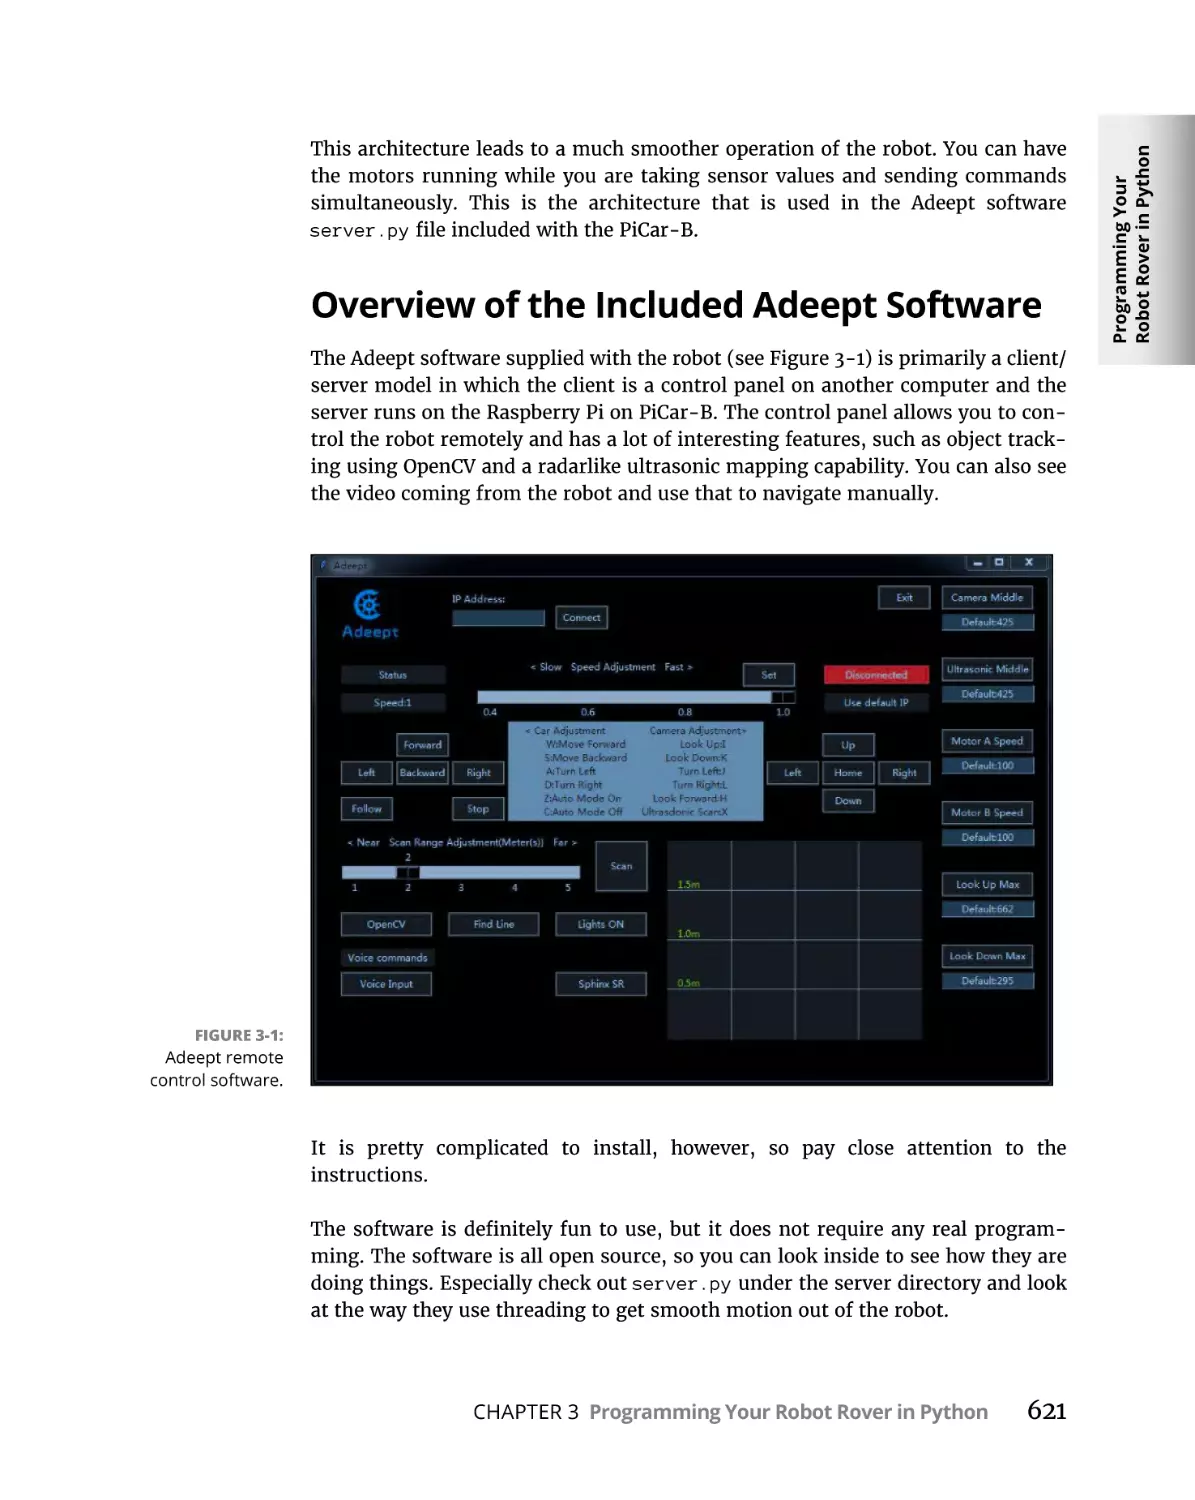 Overview of the Included Adeept Software